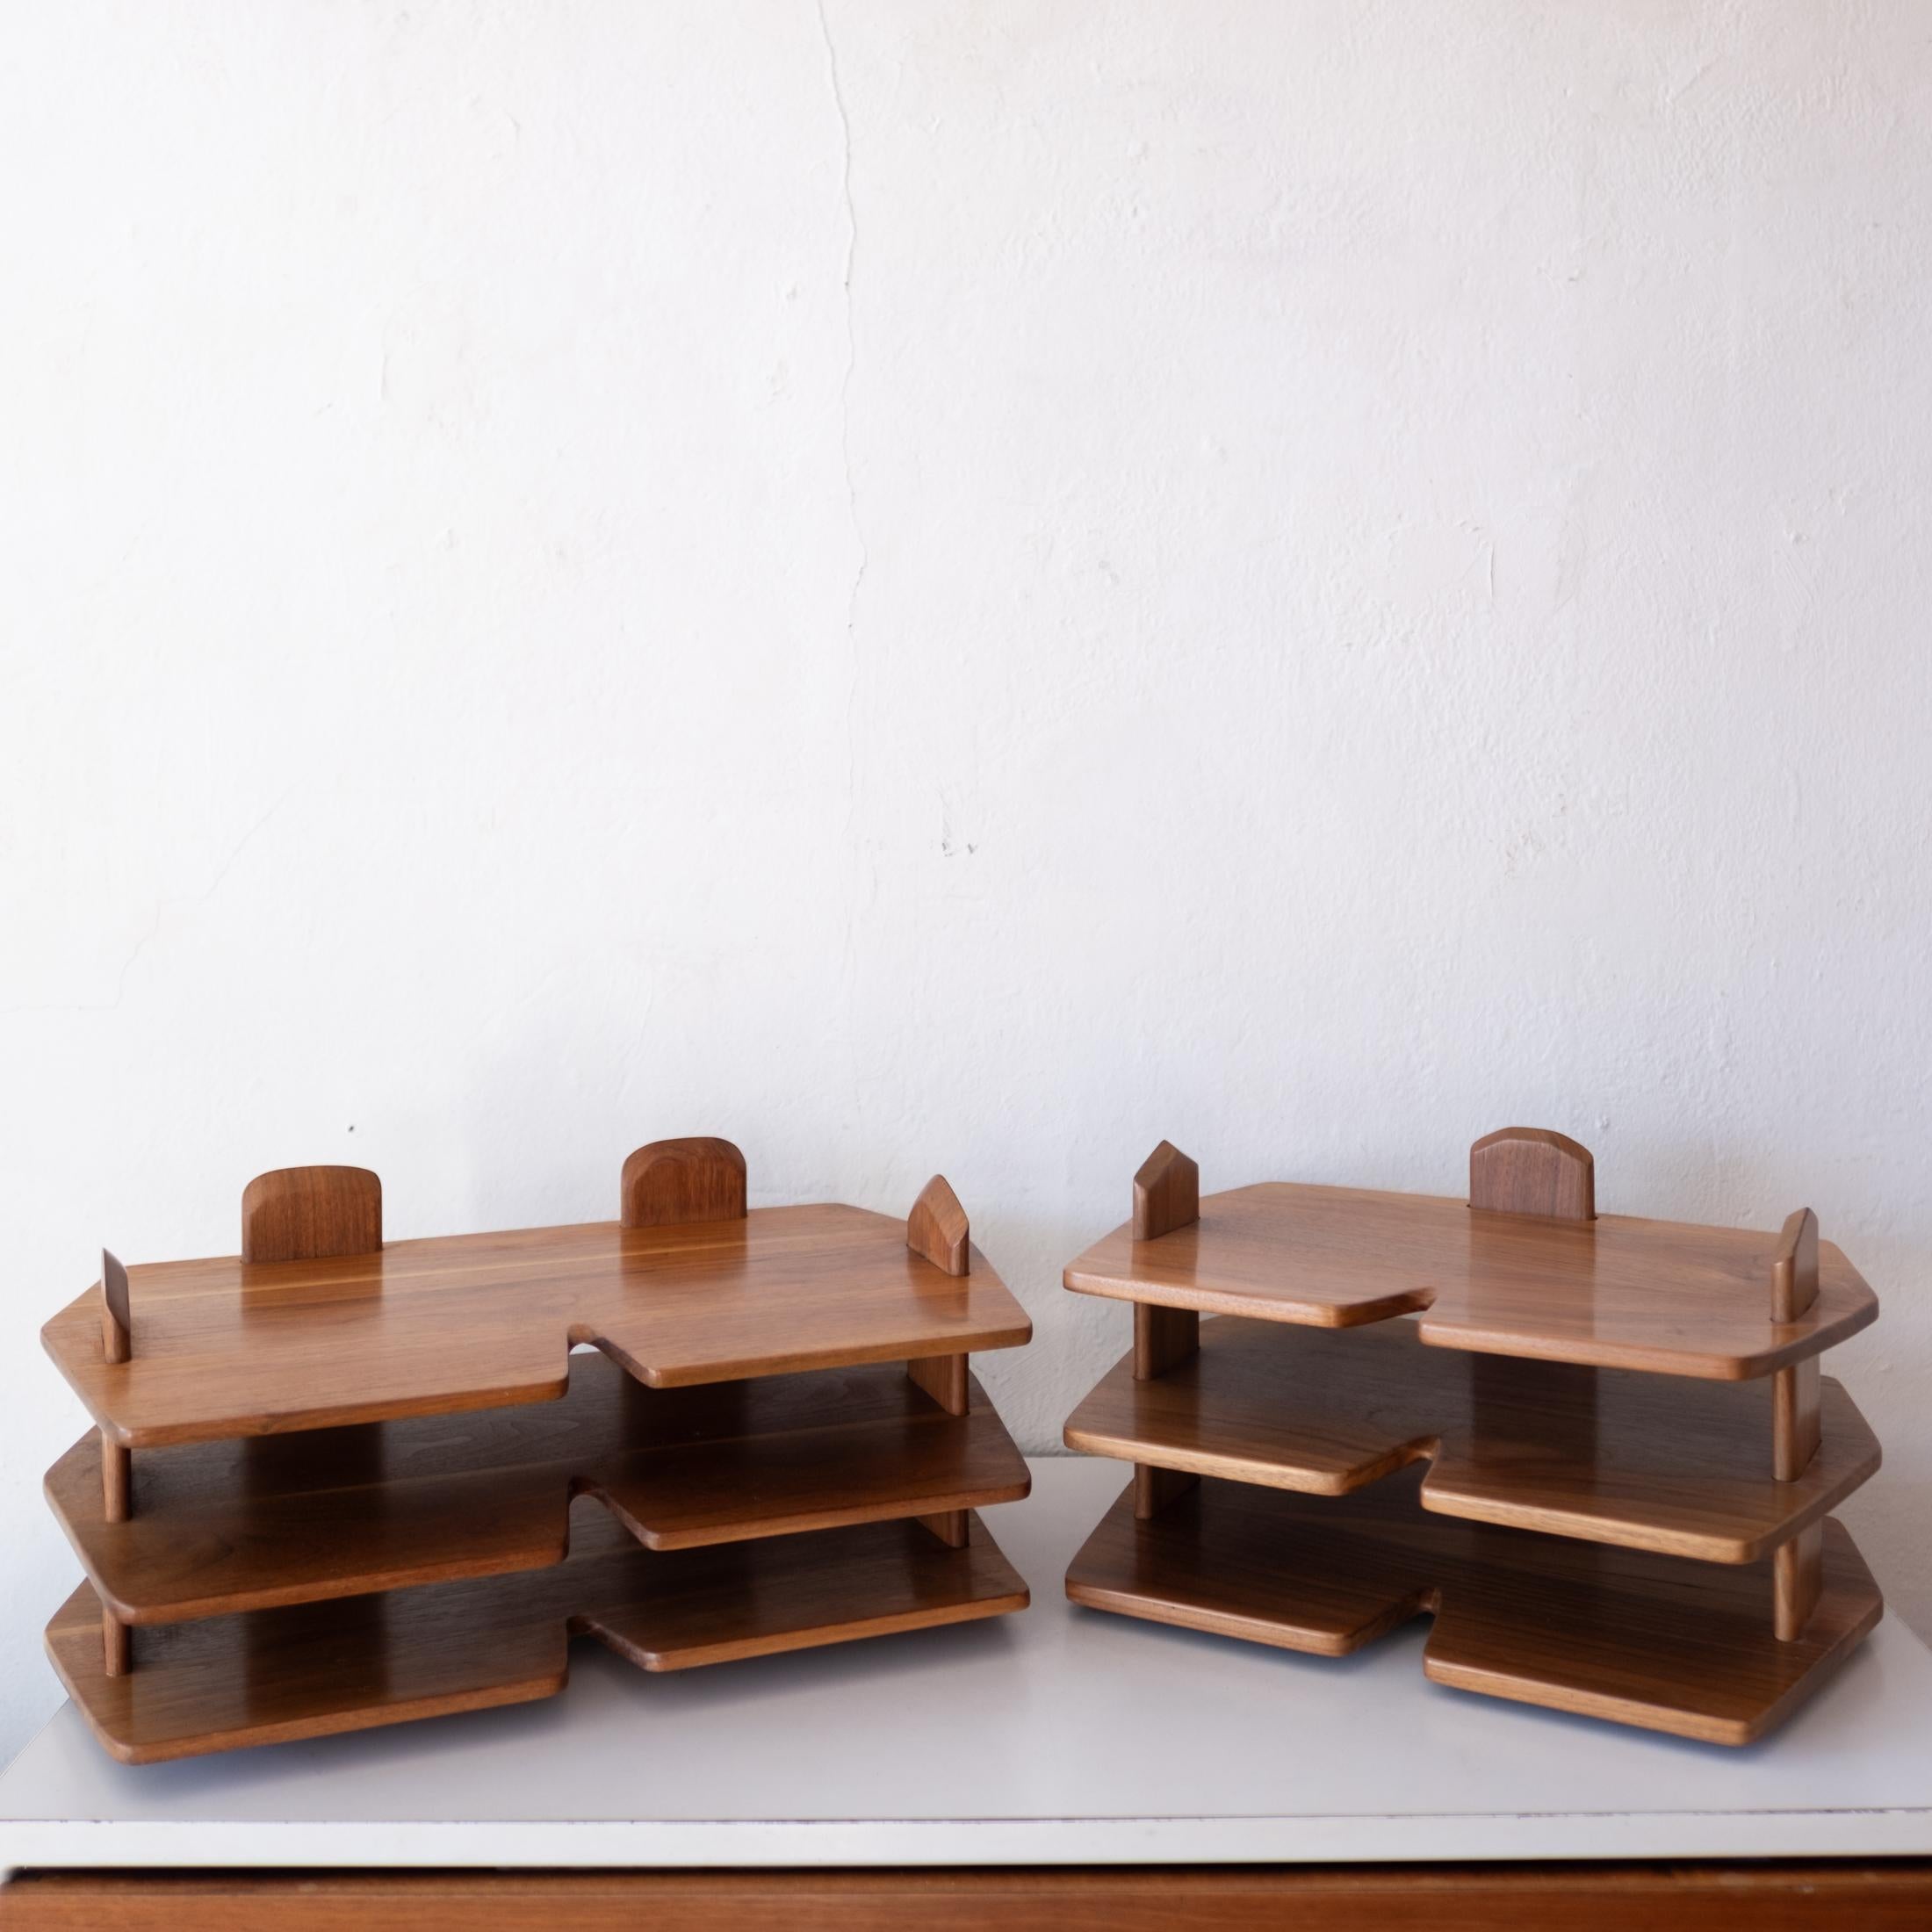 Organic Modern Handcrafted Studio Wood Letter Trays by Appalachian Artist Kelly Mehler For Sale